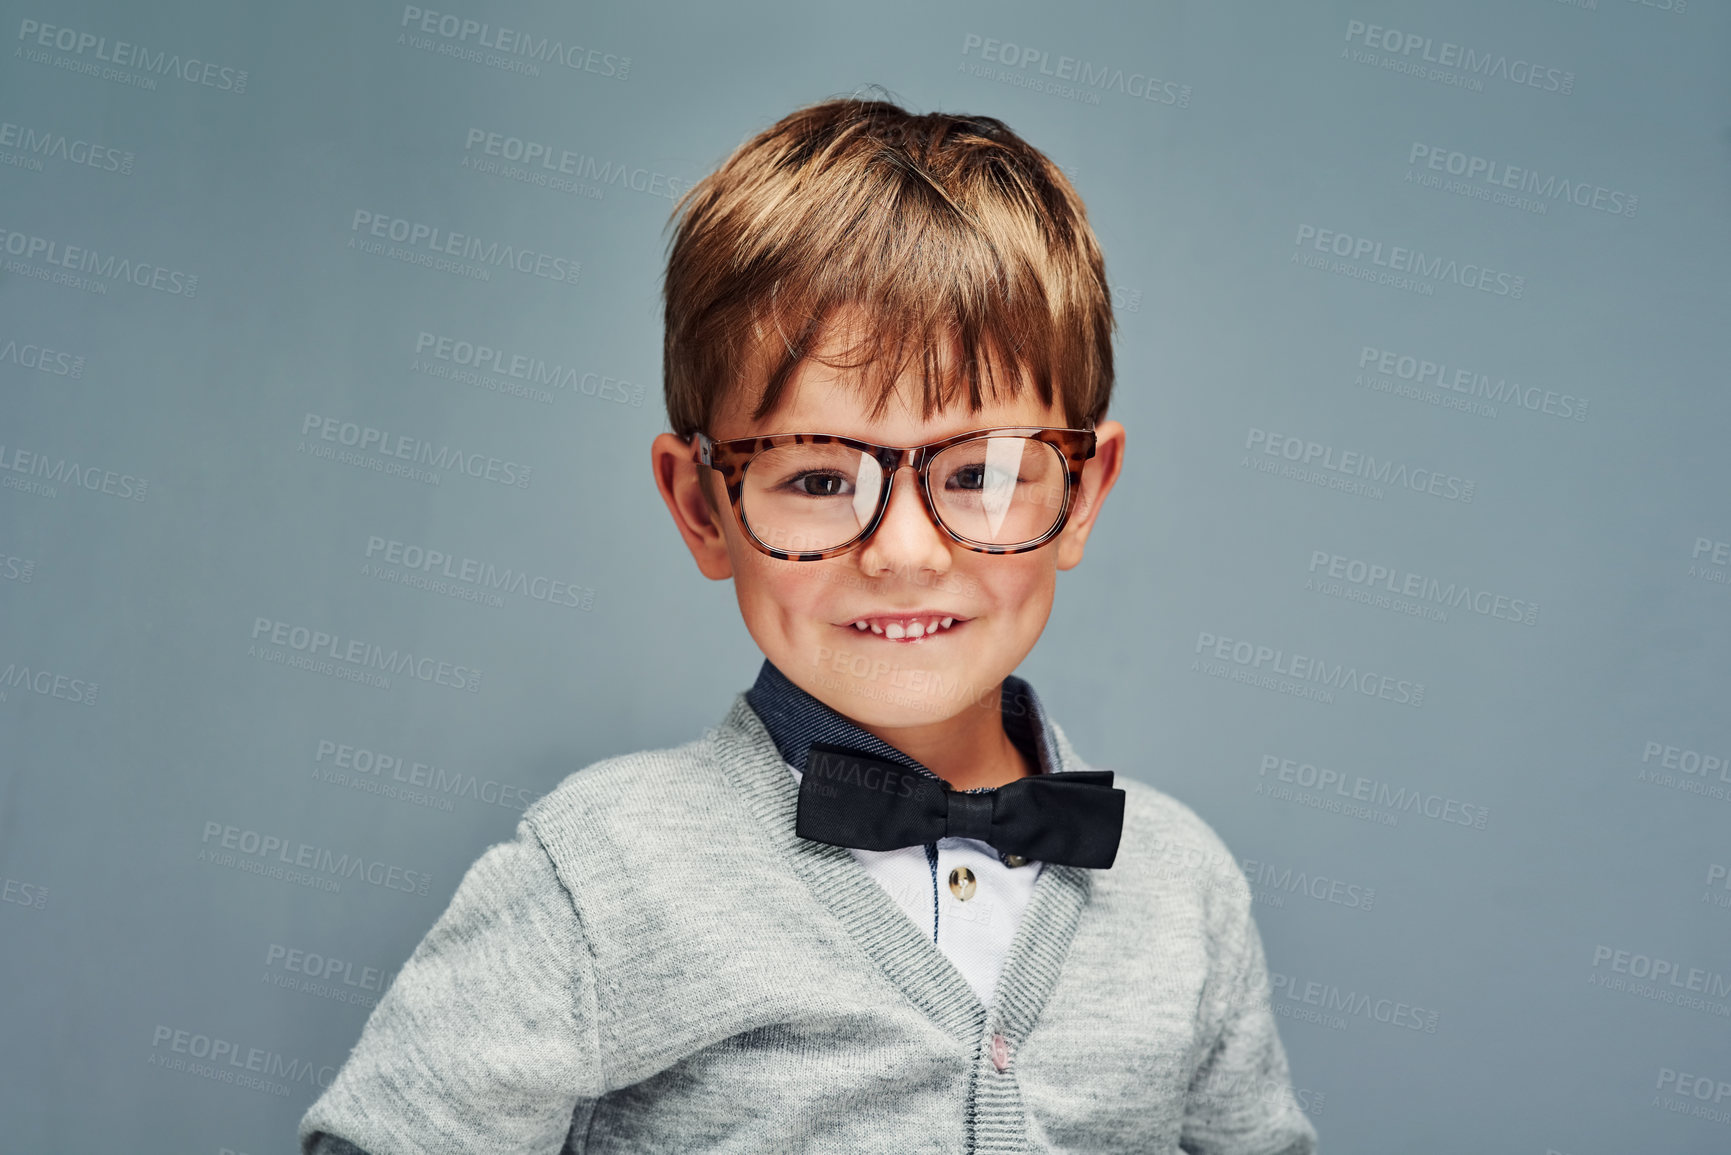 Buy stock photo Studio portrait of an adorable little boy dressed smartly against a gray background